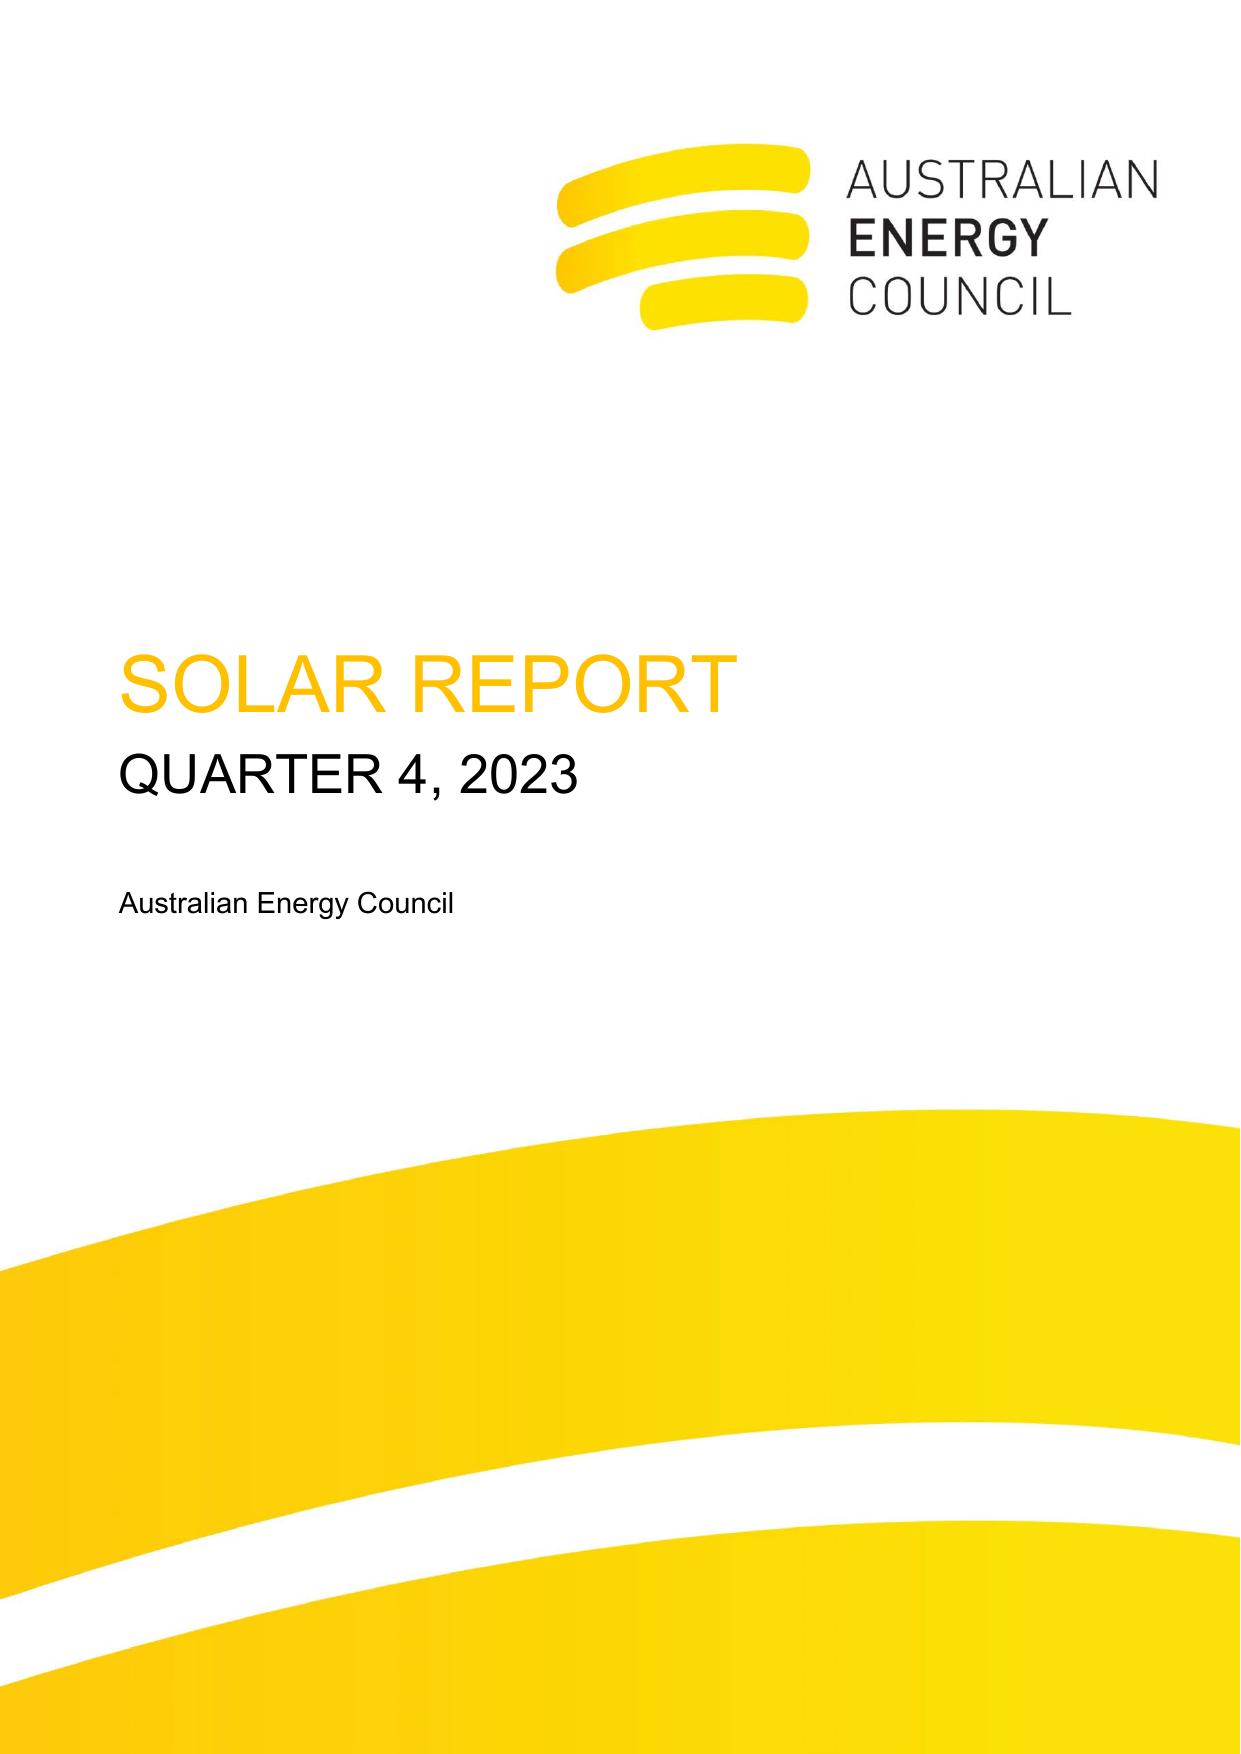 ENERGYCOUNCIL Annual Report